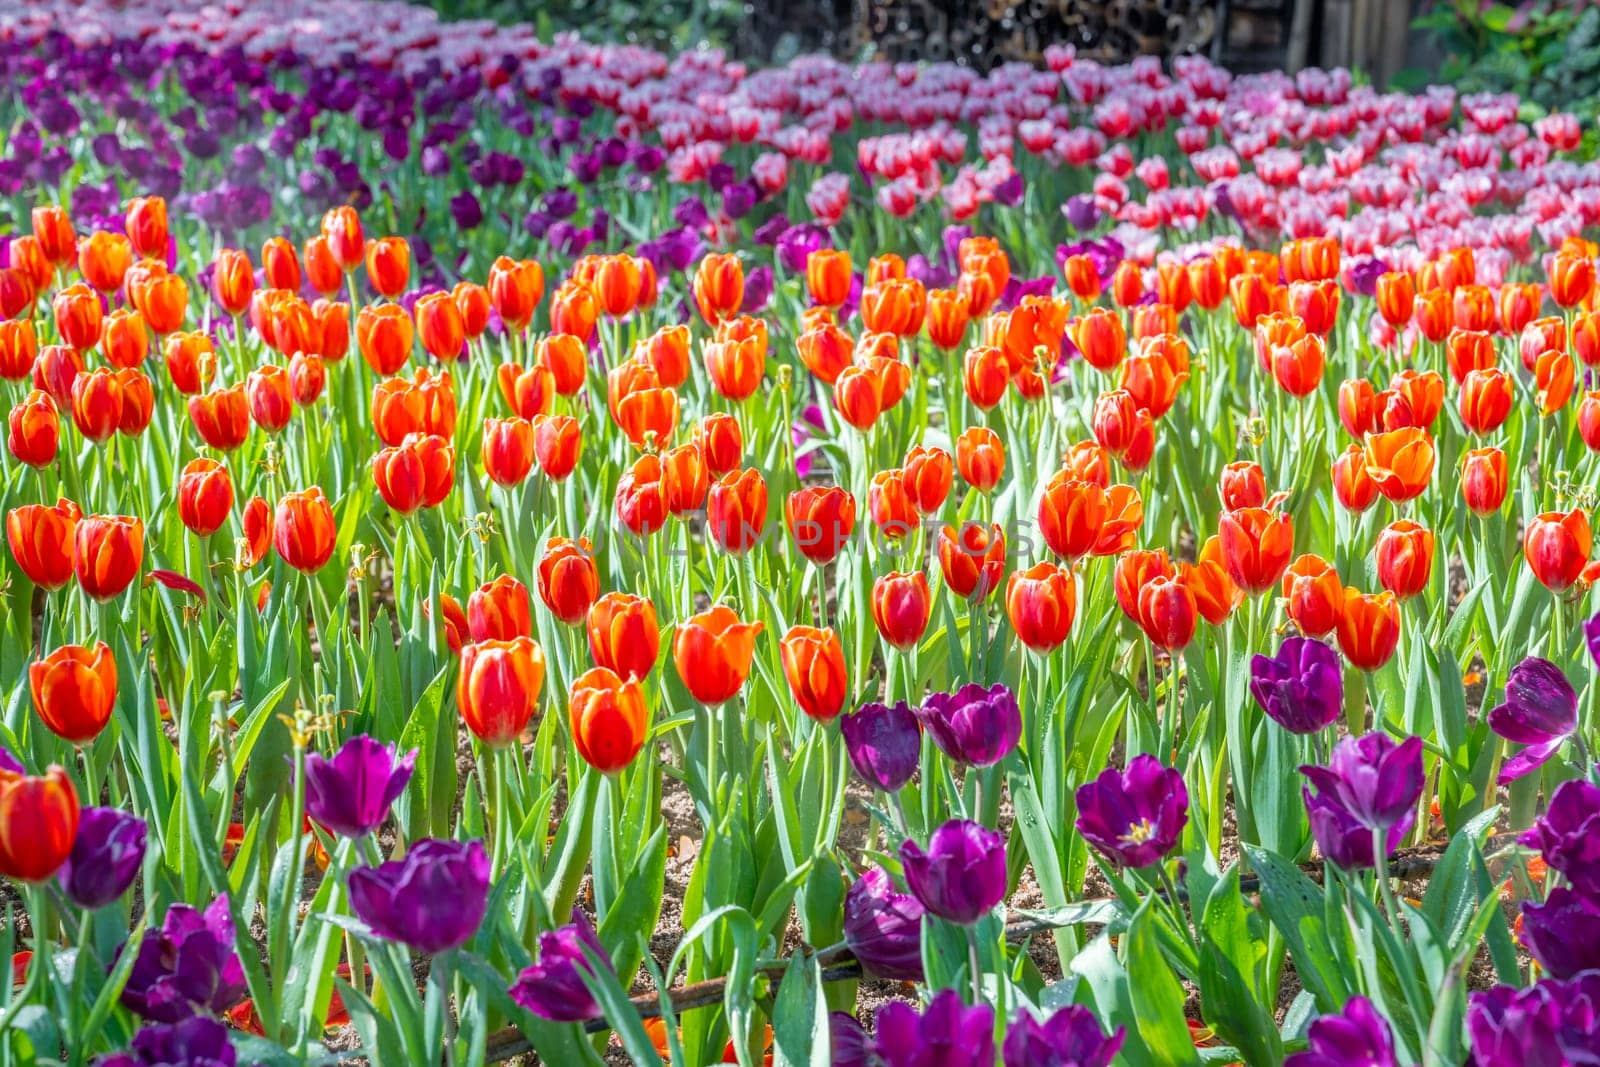 The garden field with tulips of various bright rainbow color petals, beautiful bouquet of colors in daylight in ornamental garden by Gamjai